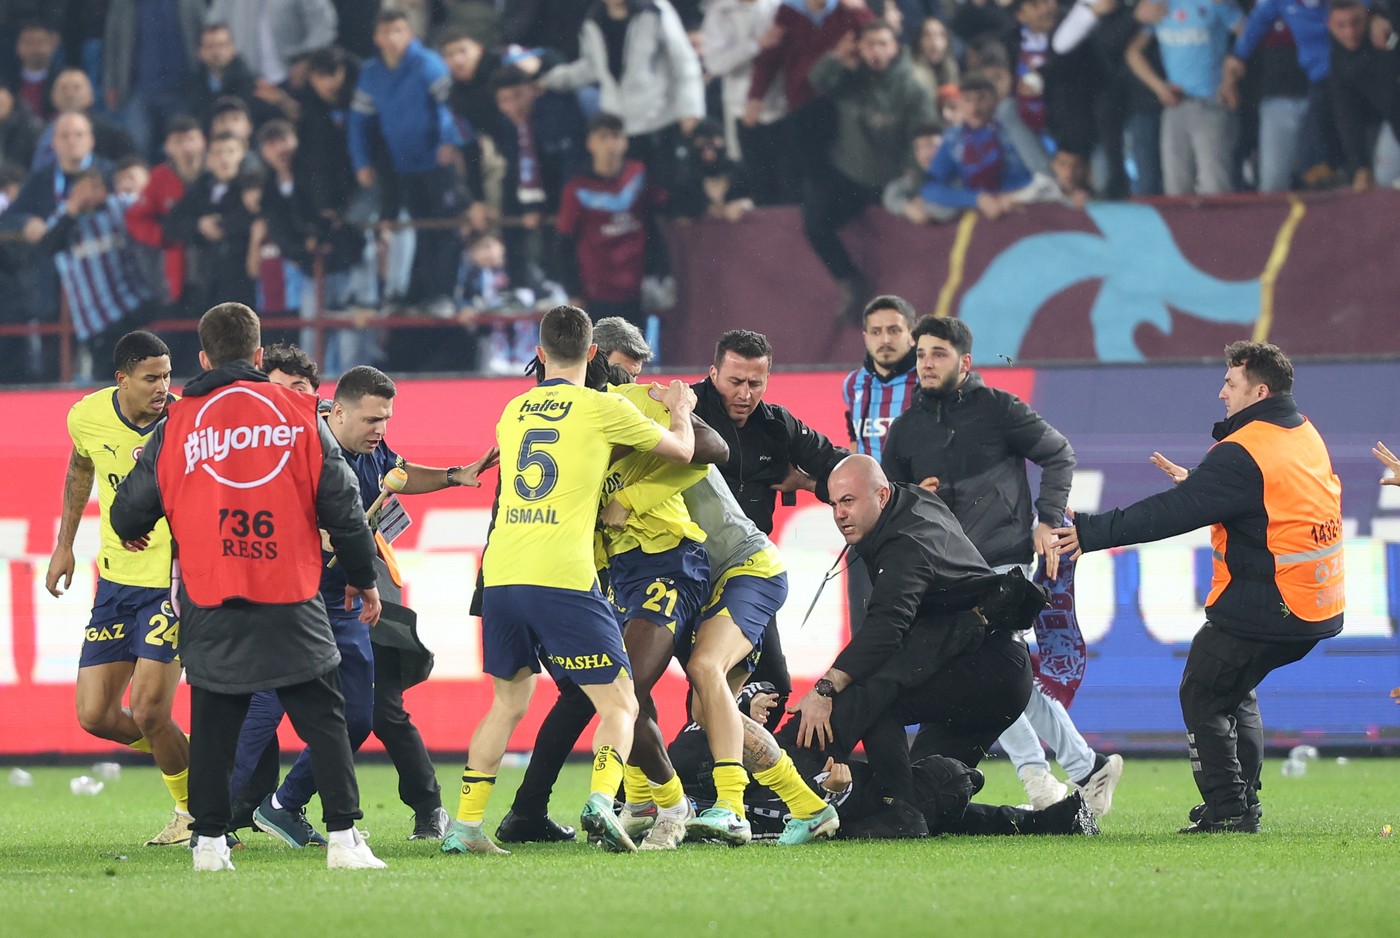 March 17, 2024, Trabzon, Turkey: After the game between Trabzonspor and FenerbahÃ§e in the Turkish Super League, Trabzonspor fans entered the field and attacked FenerbahÃ§e players in Trabzon, Turkey on 17 March 2024. End of the game, FenerbahÃ§e players remained on the field to celebrate their 3-2 victory, which angered fans of the home team. Trabzonspor supporters rushed onto the field and attacked Fenerbahce players.,Image: 857655667, License: Rights-managed, Restrictions: * Turkey Rights Out *, Model Release: no, Credit line: Depo Photos / Zuma Press / Profimedia